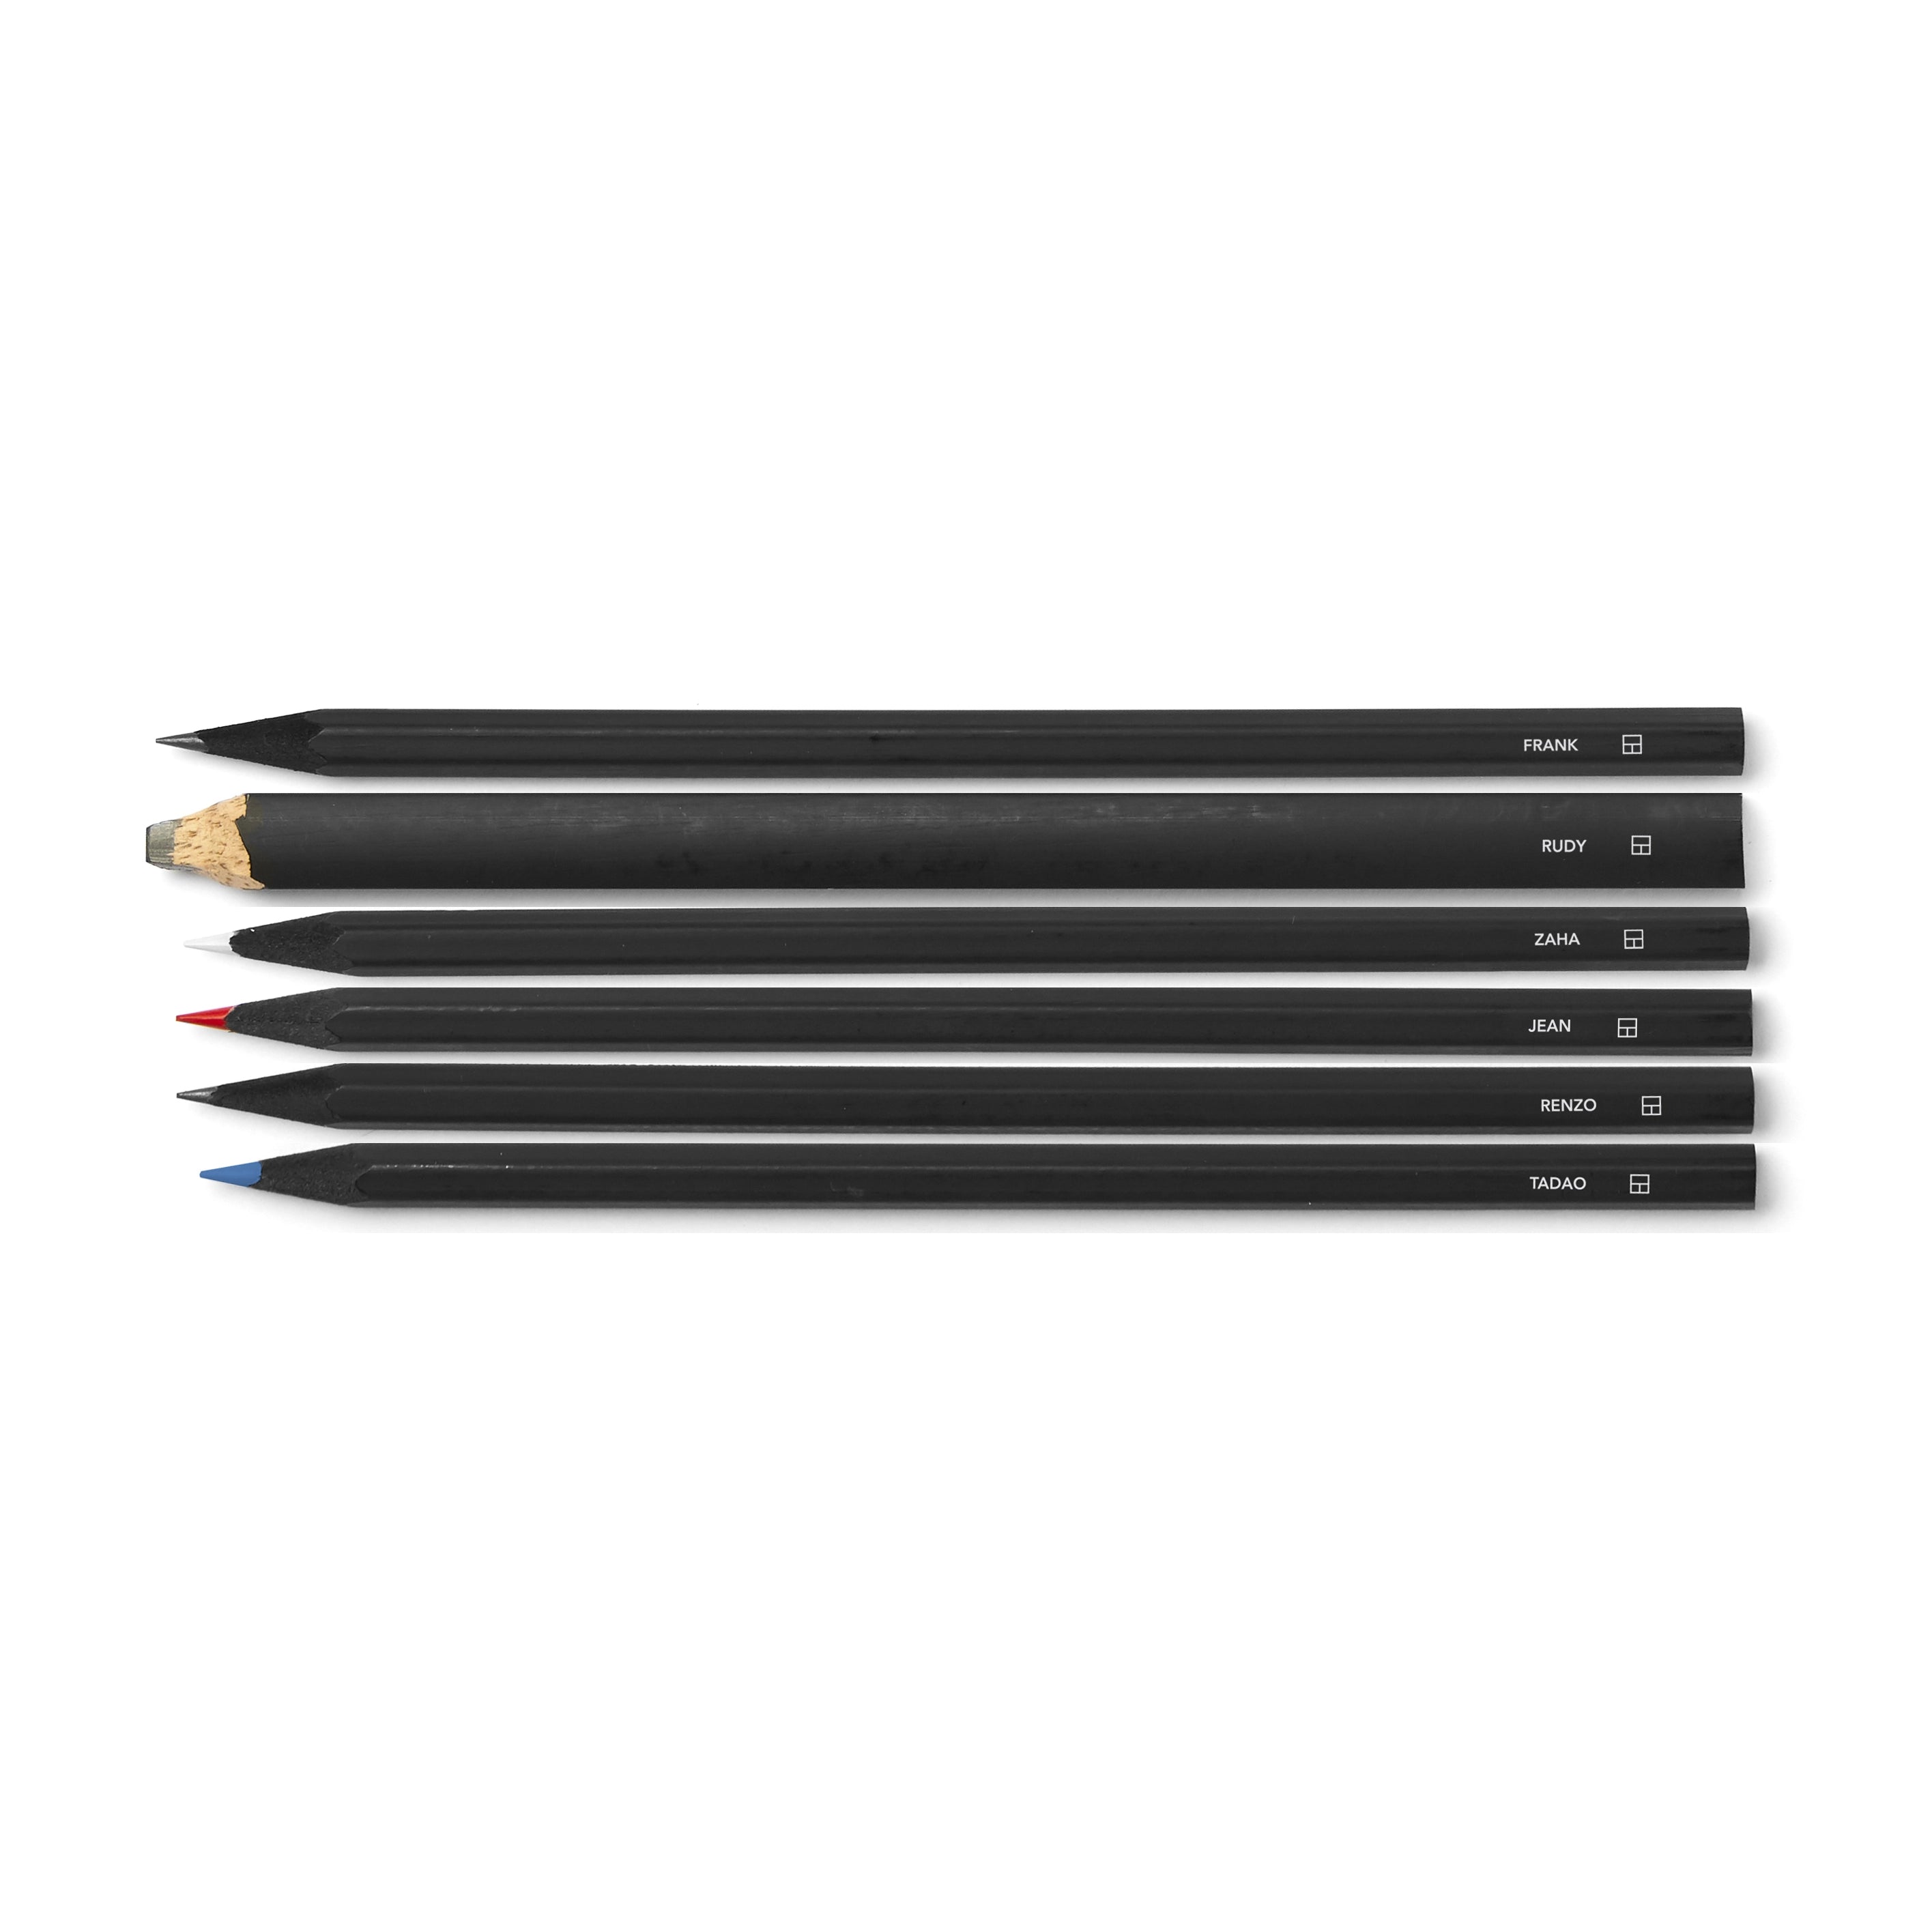 Pencil Set with Scaled Ruler